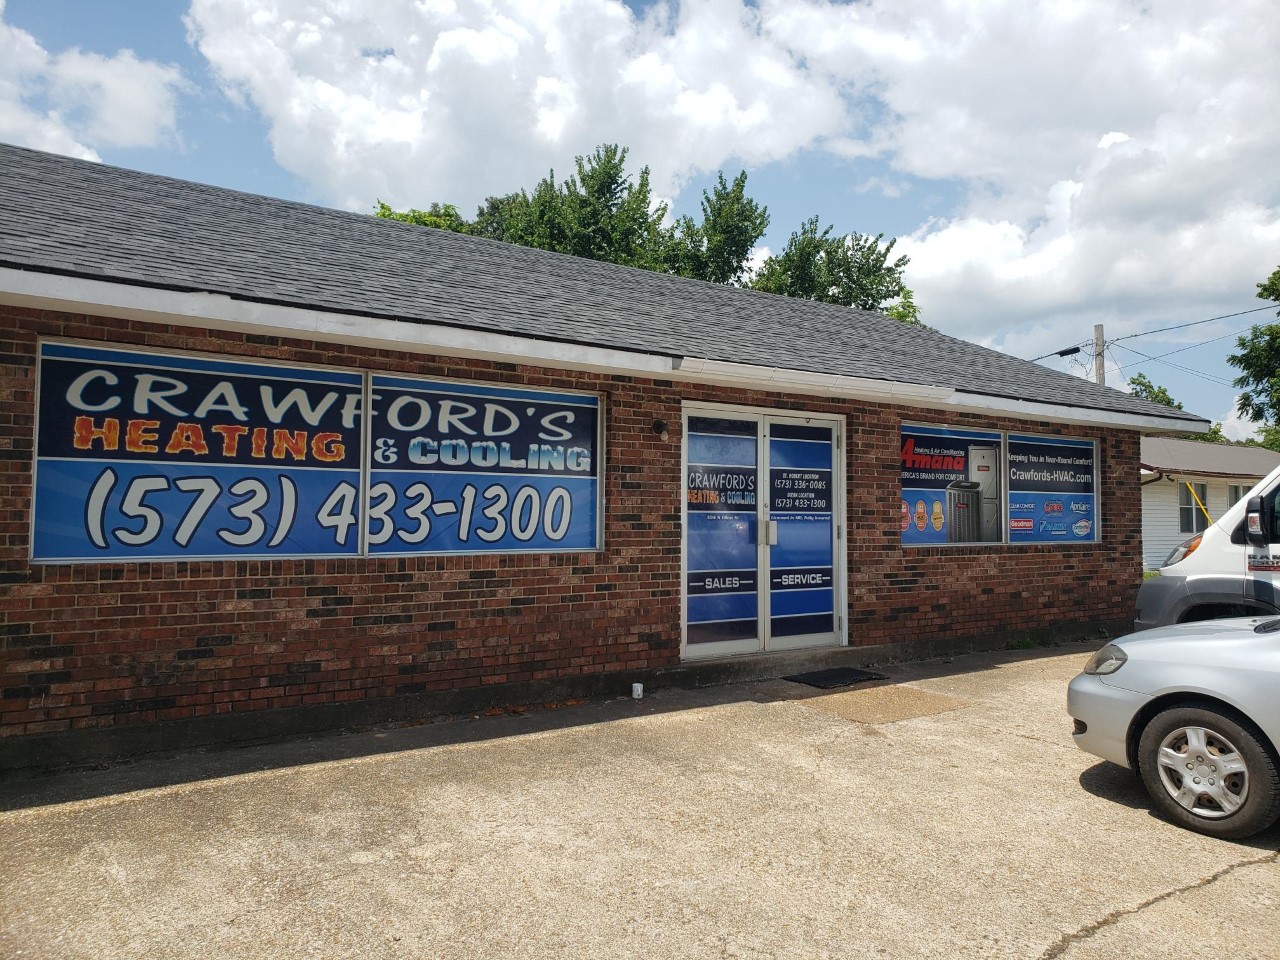 Crawfords Heating And Cooling Vinyl Wraps Store Fronts Windows Outdoor Pro Dezigns Columbia Missouri